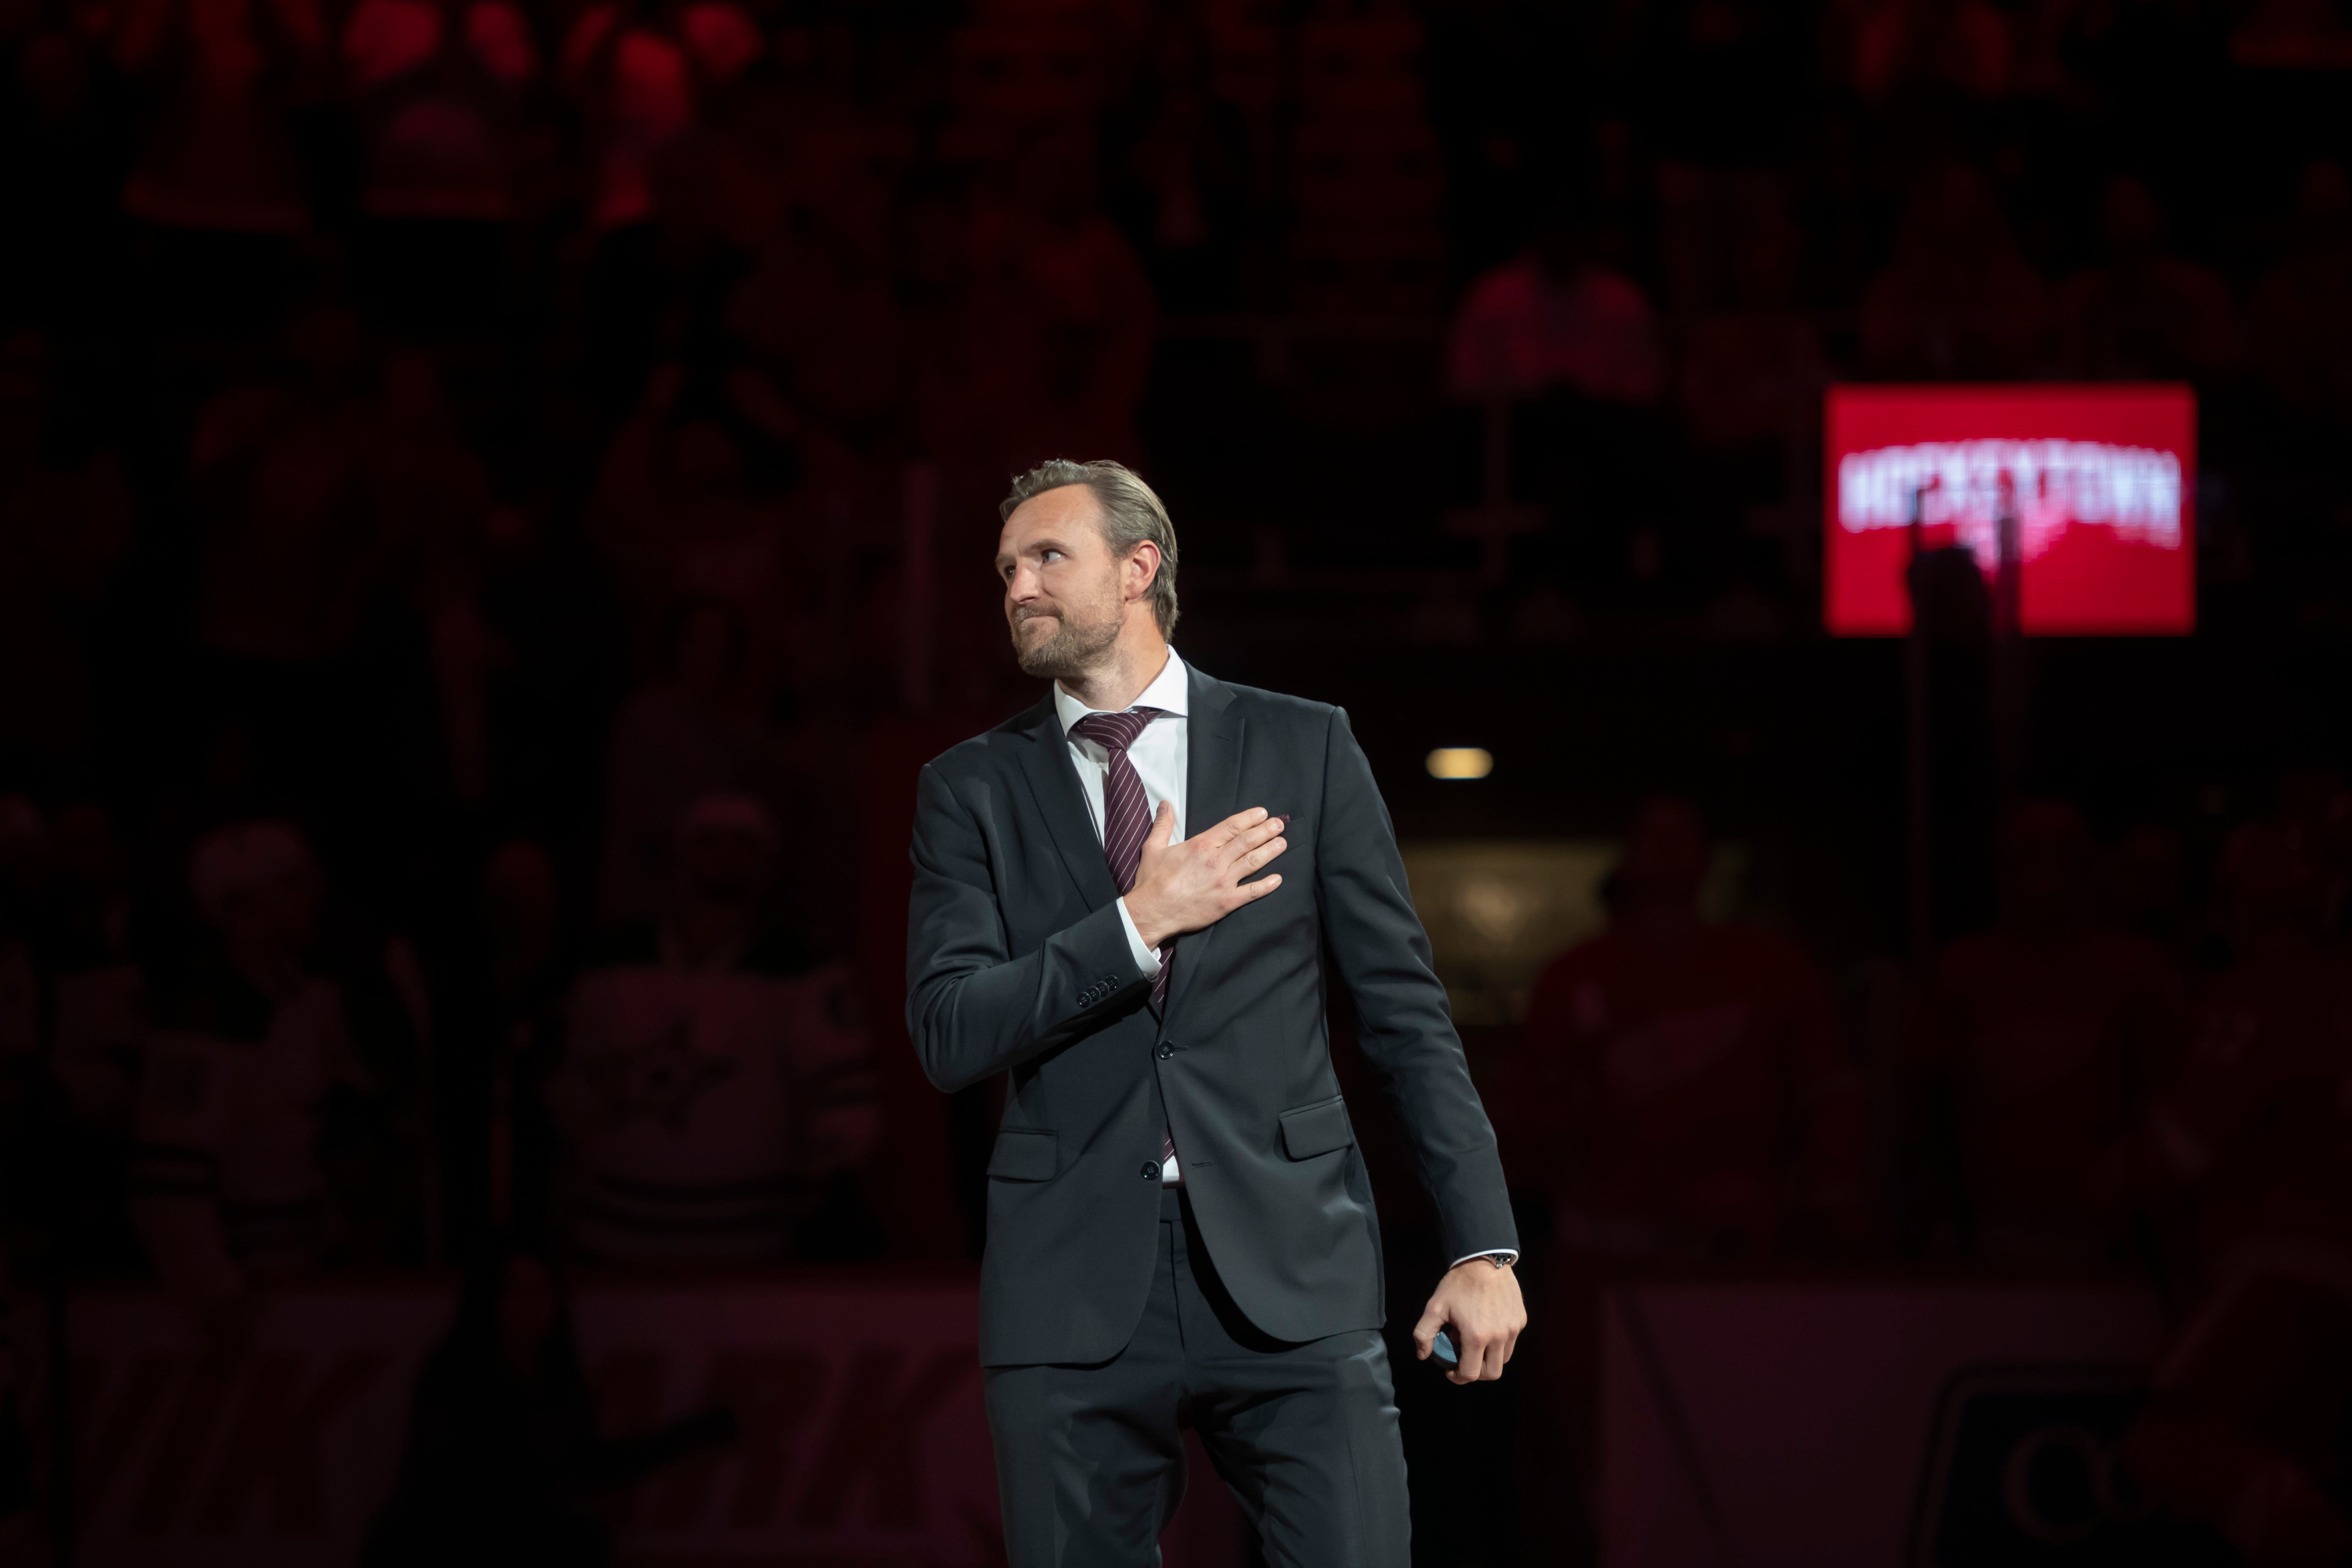 Former Red Wings defenseman Nicklas Kronwall shows his appreciation to the fans while walking onto the ice for a ceremonial puck drop before the start of the game.